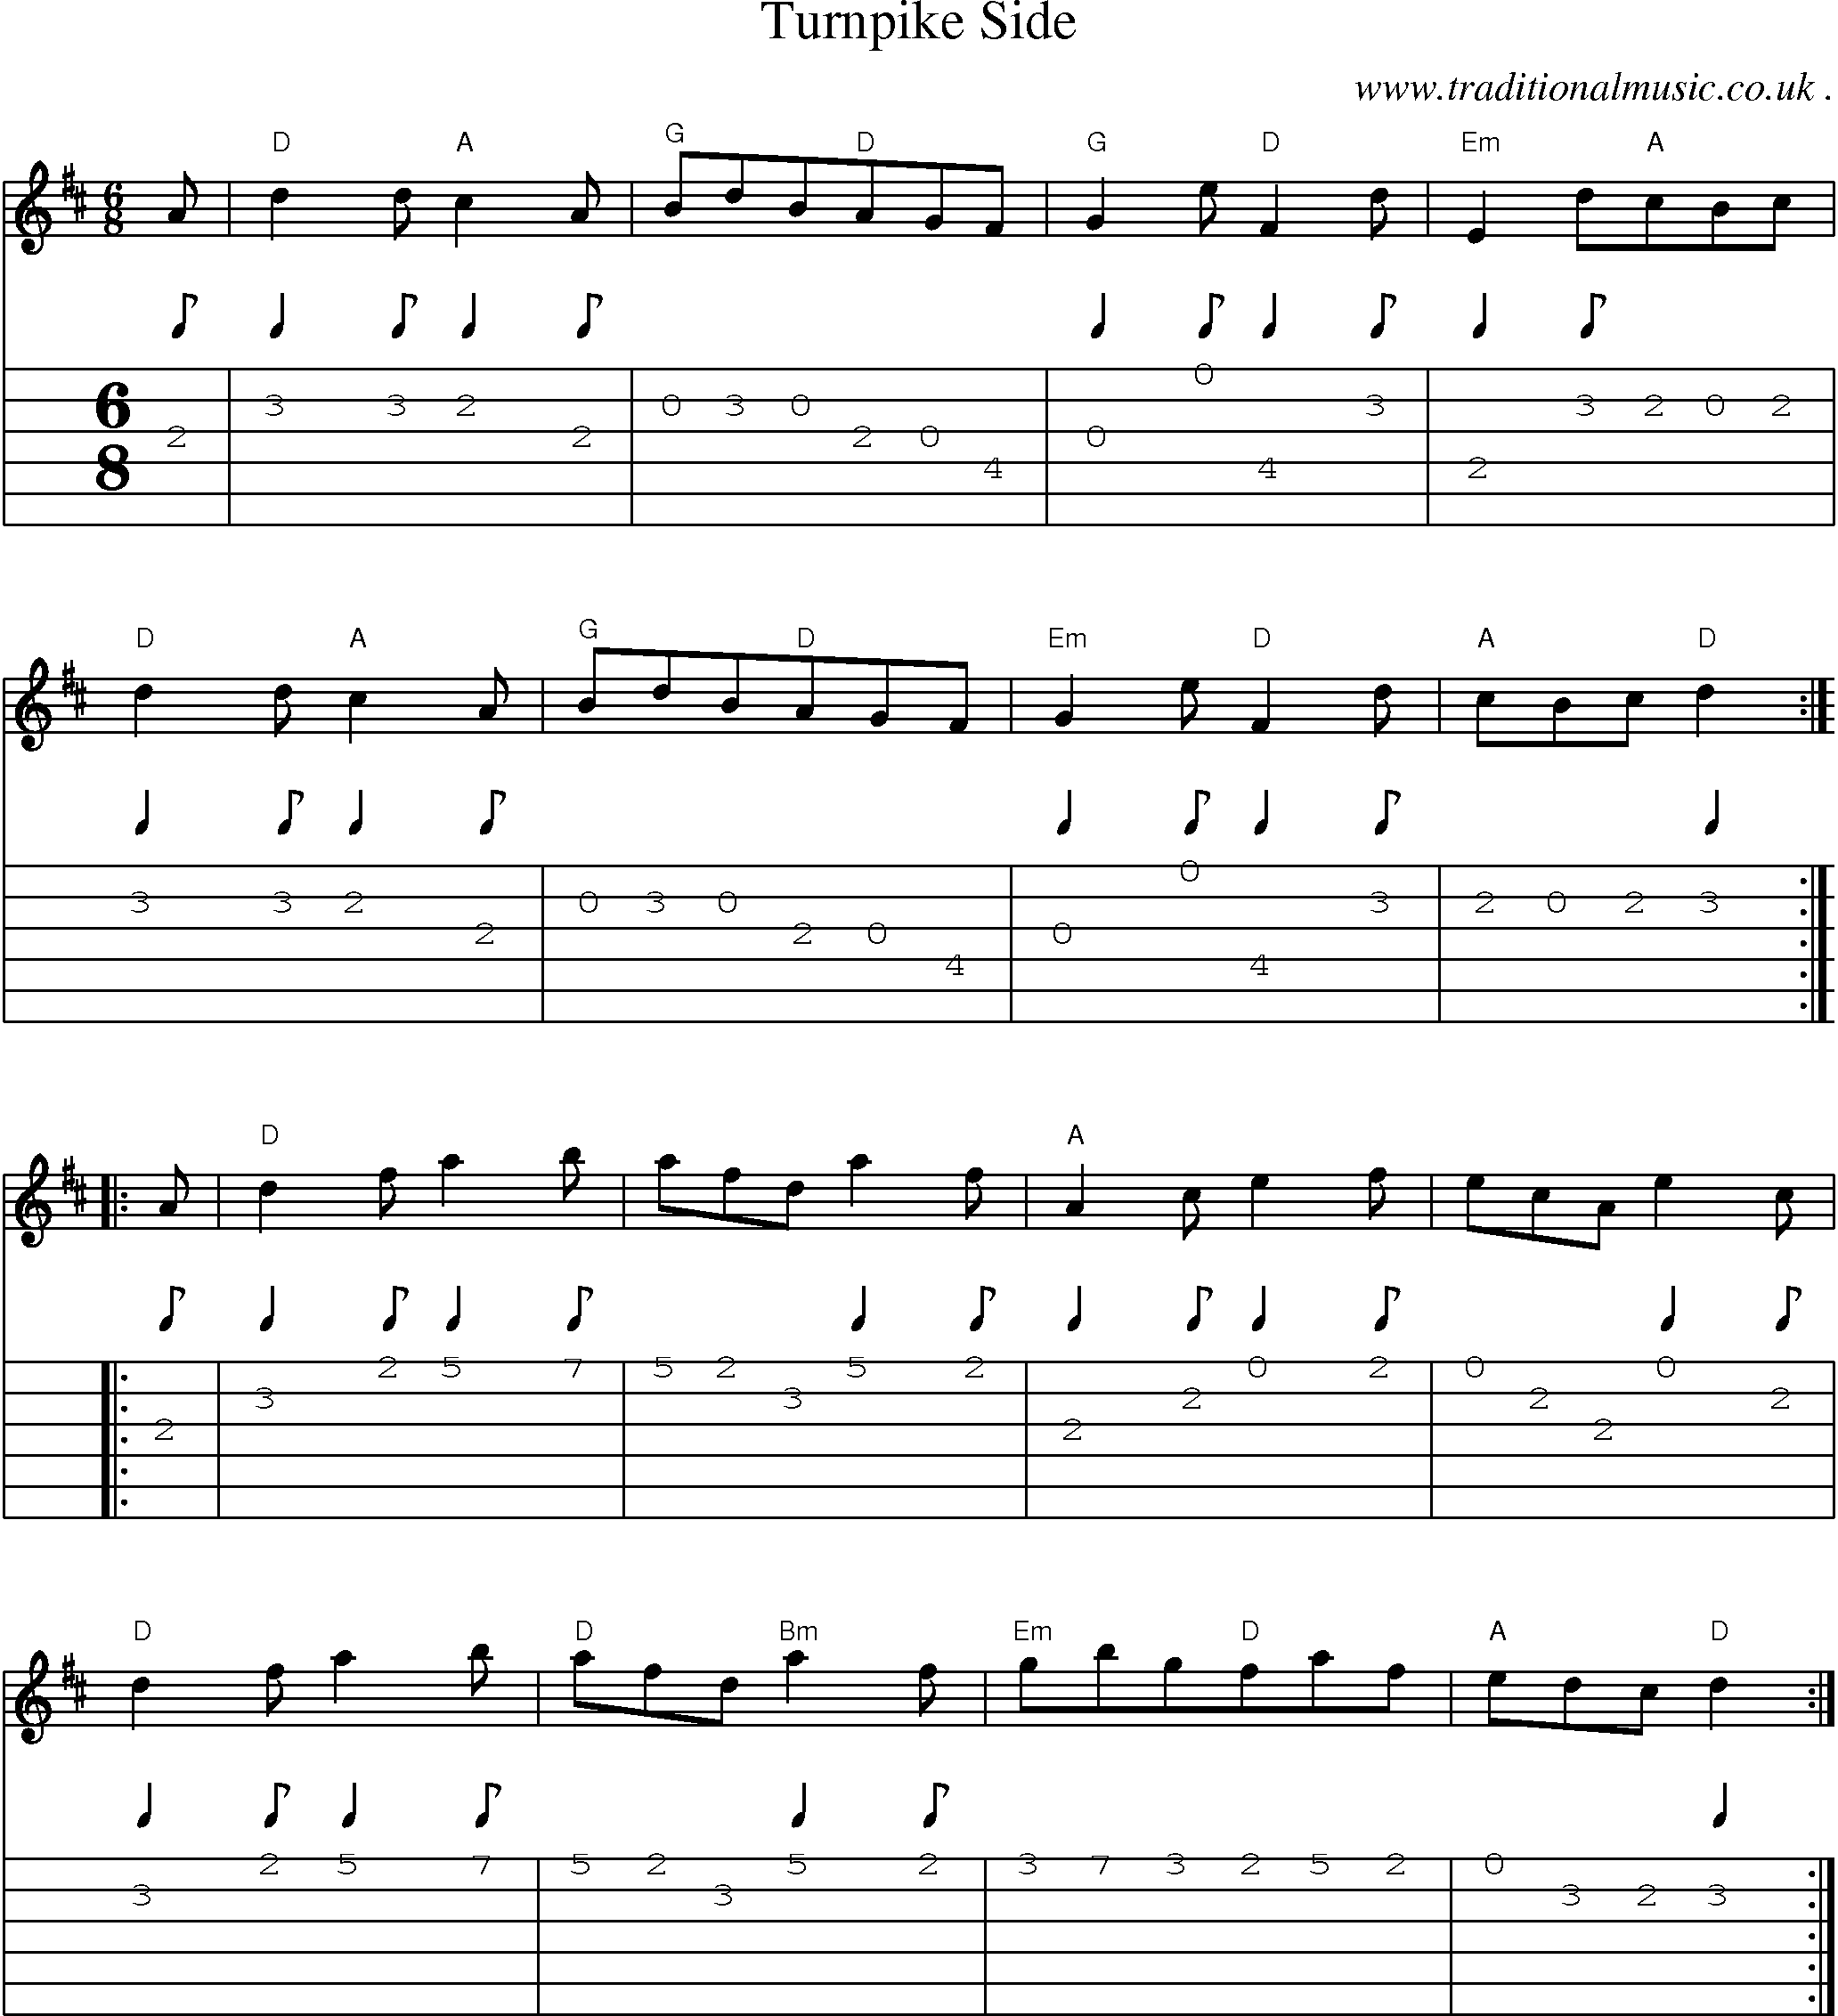 Sheet-Music and Guitar Tabs for Turnpike Side